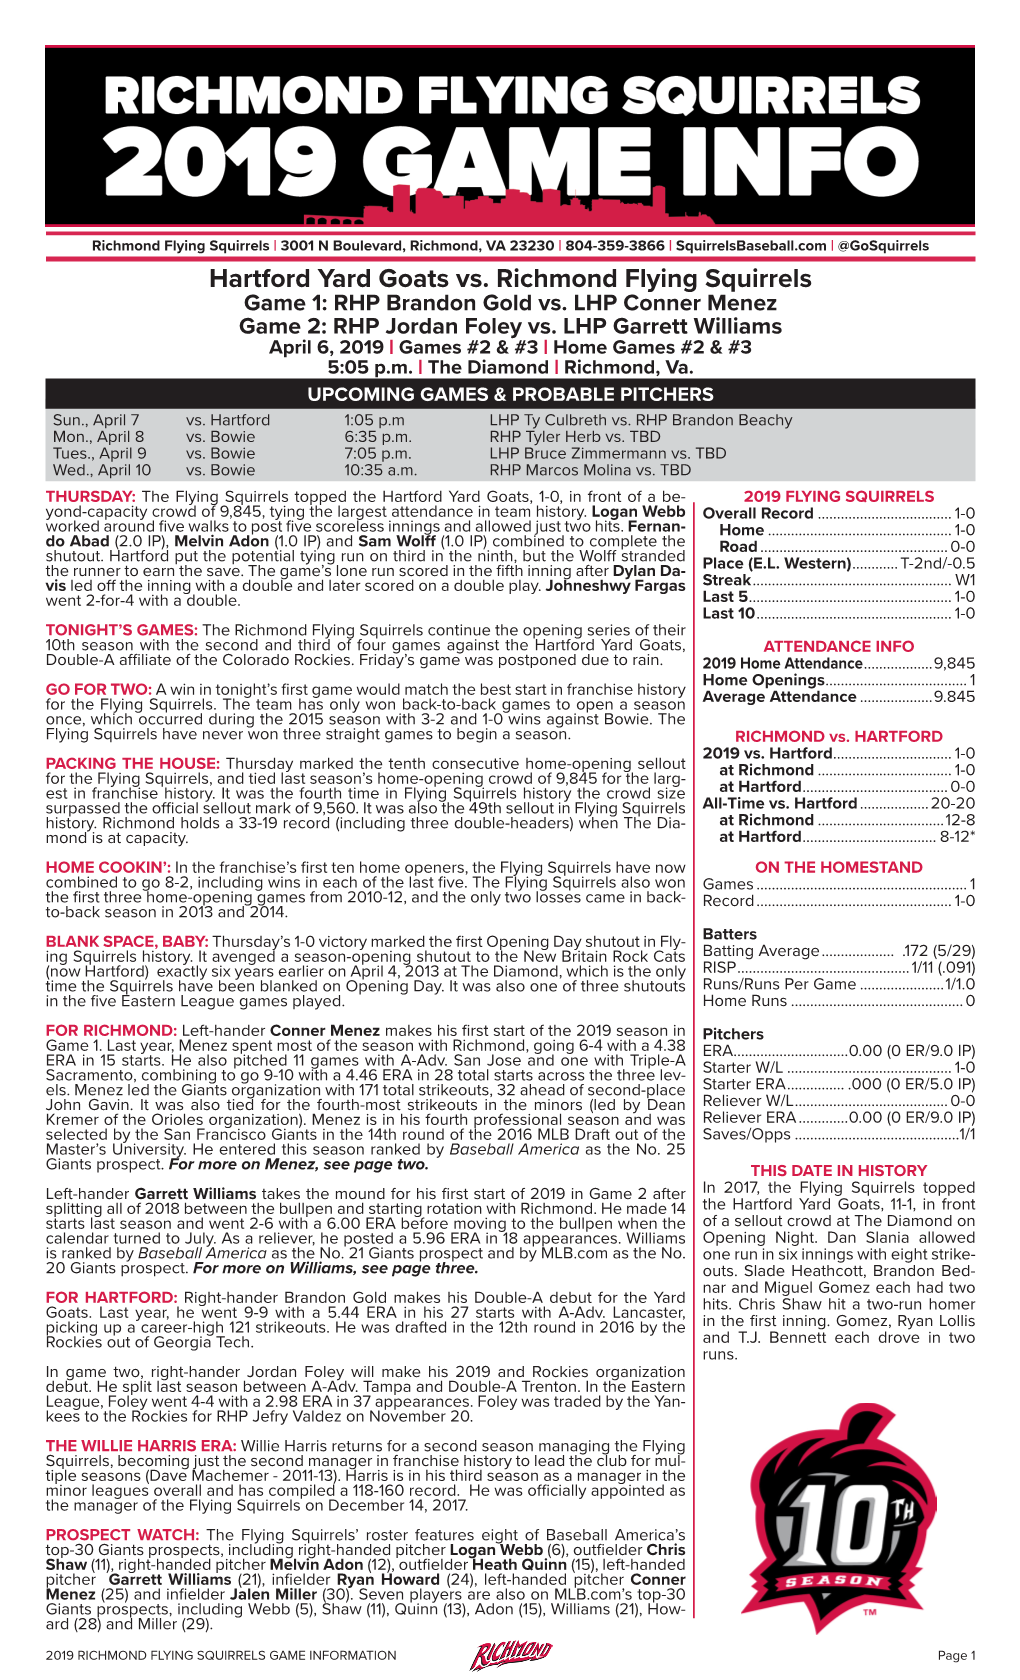 Richmond Flying Squirrels Game Notes